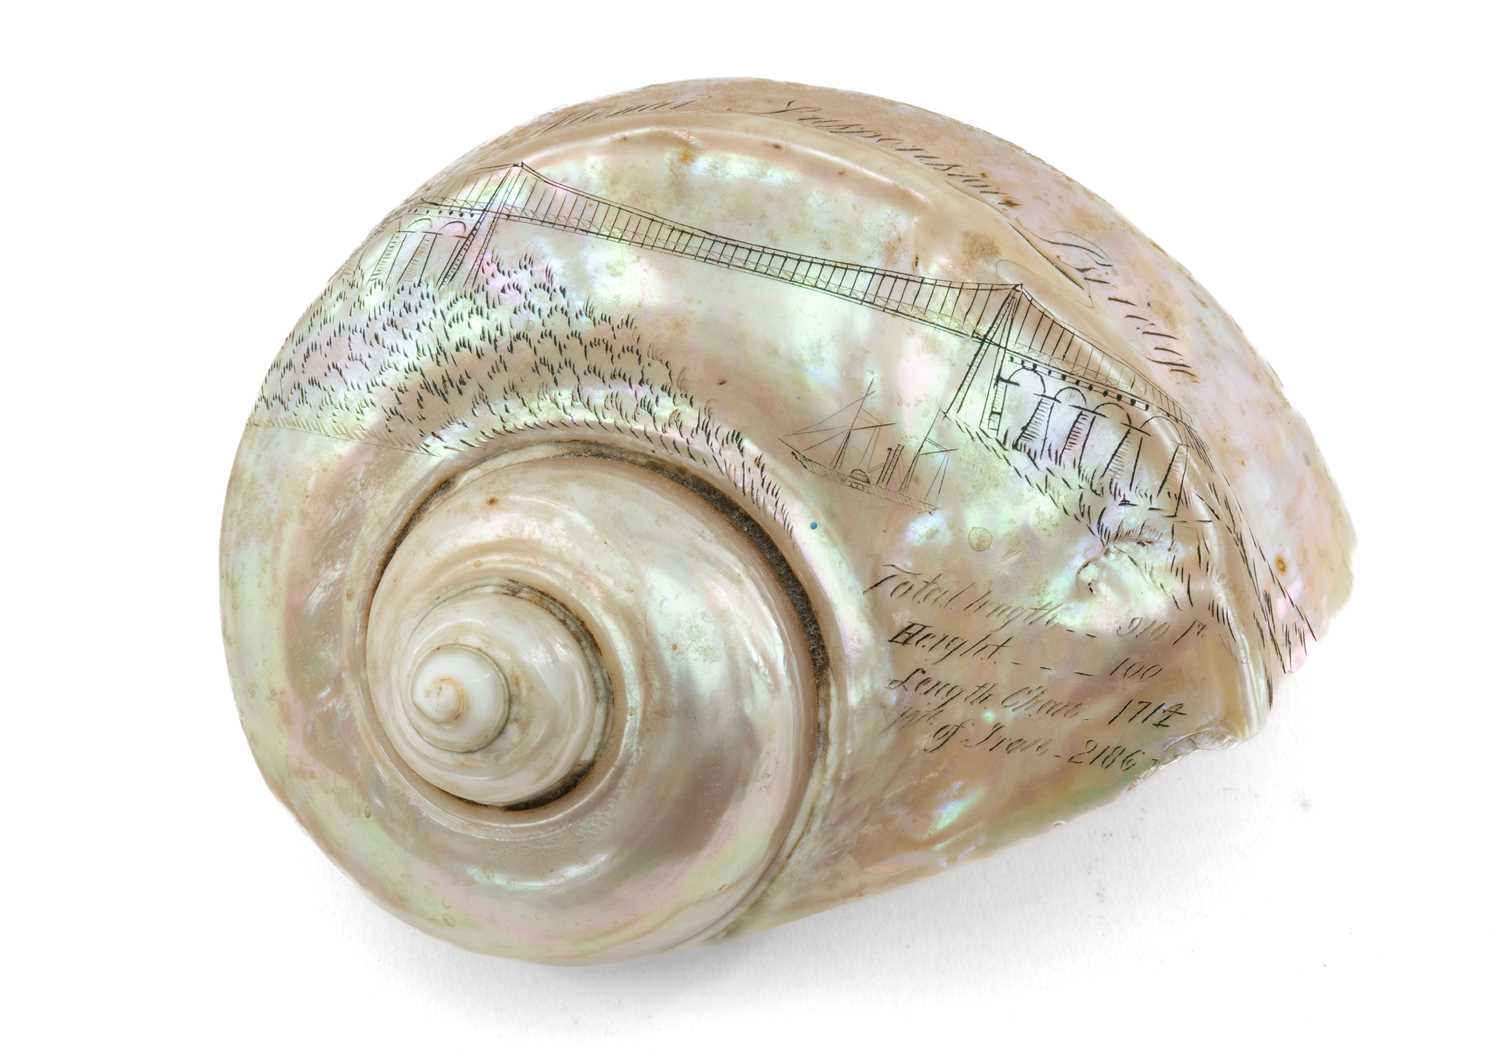 RARE WELSH SCRIMSHAW PEARLY TURBAN SHELL SOUVENIR mid-19th Century, relating to Ynys Mon (